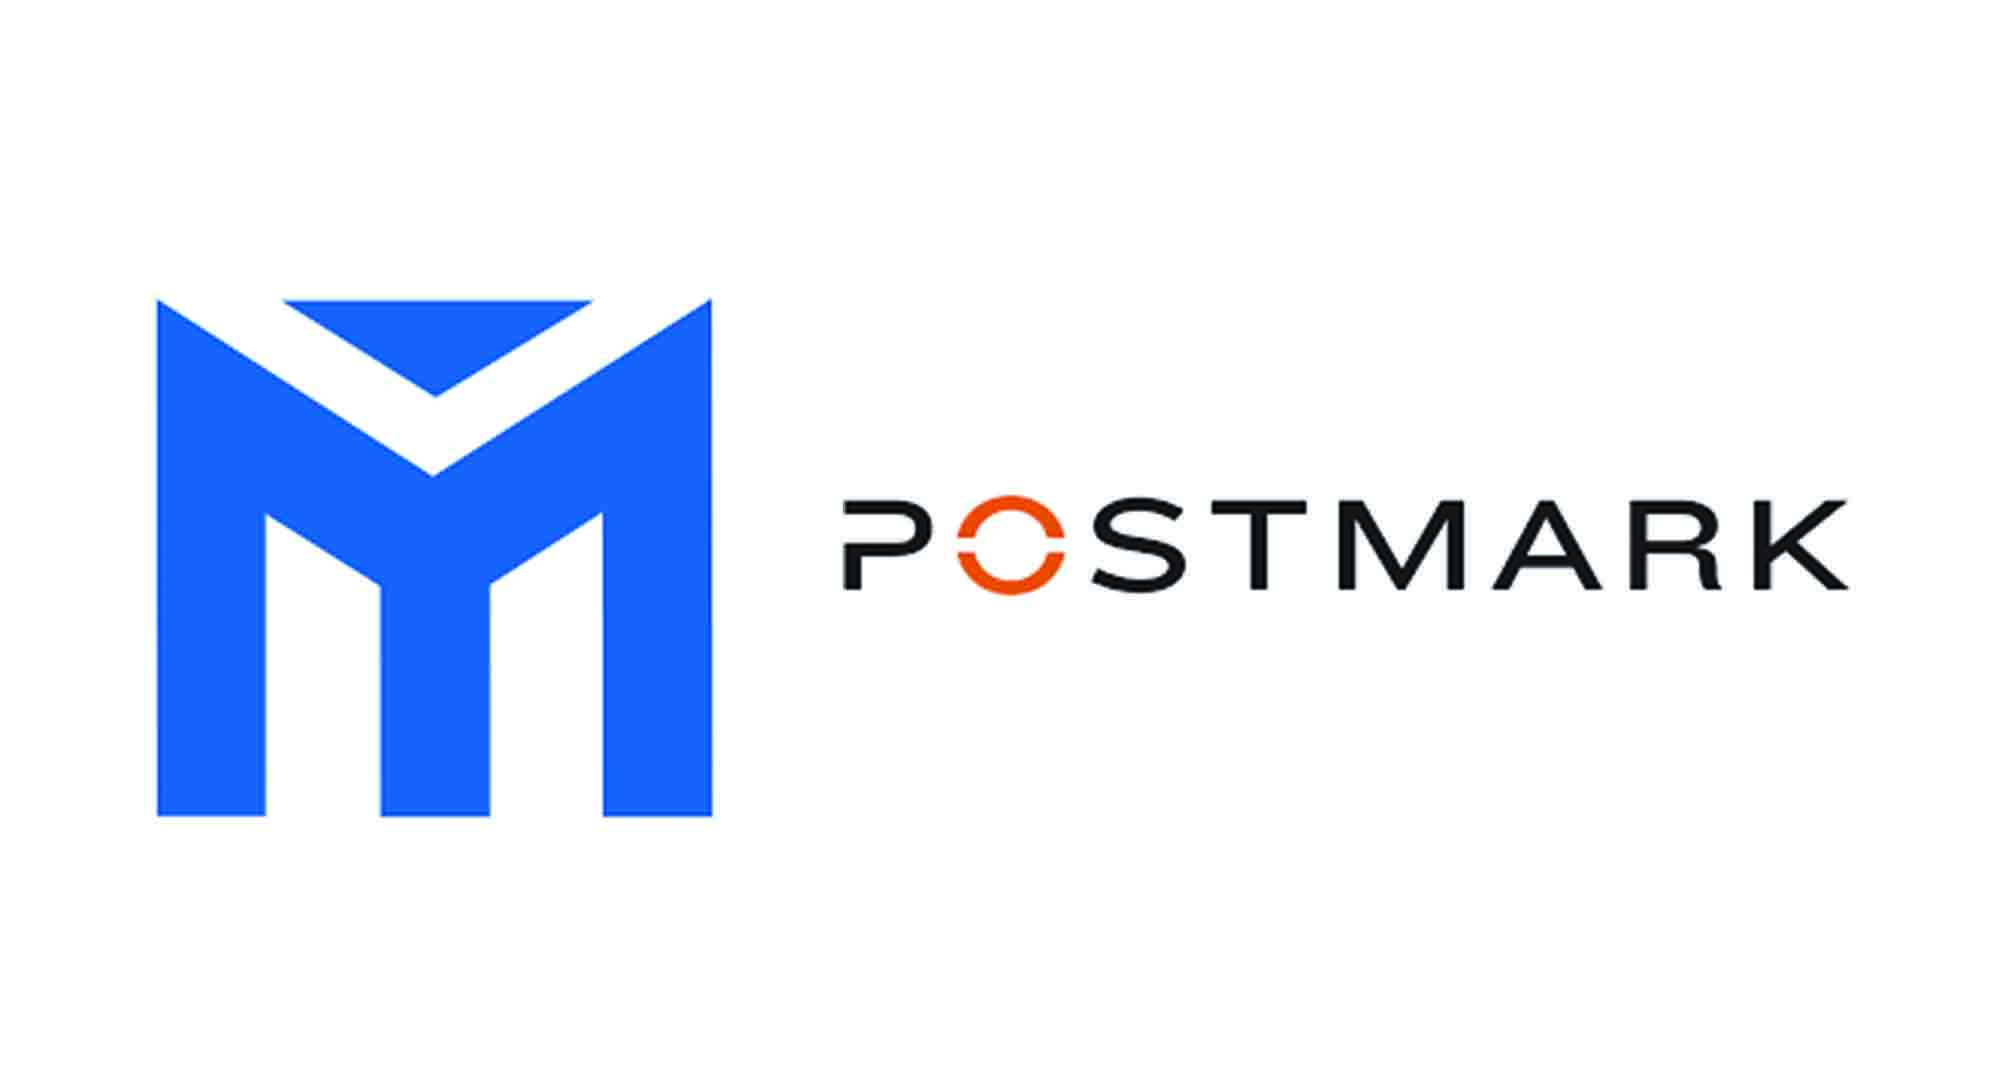 Postmark - Owned by Martin Yale